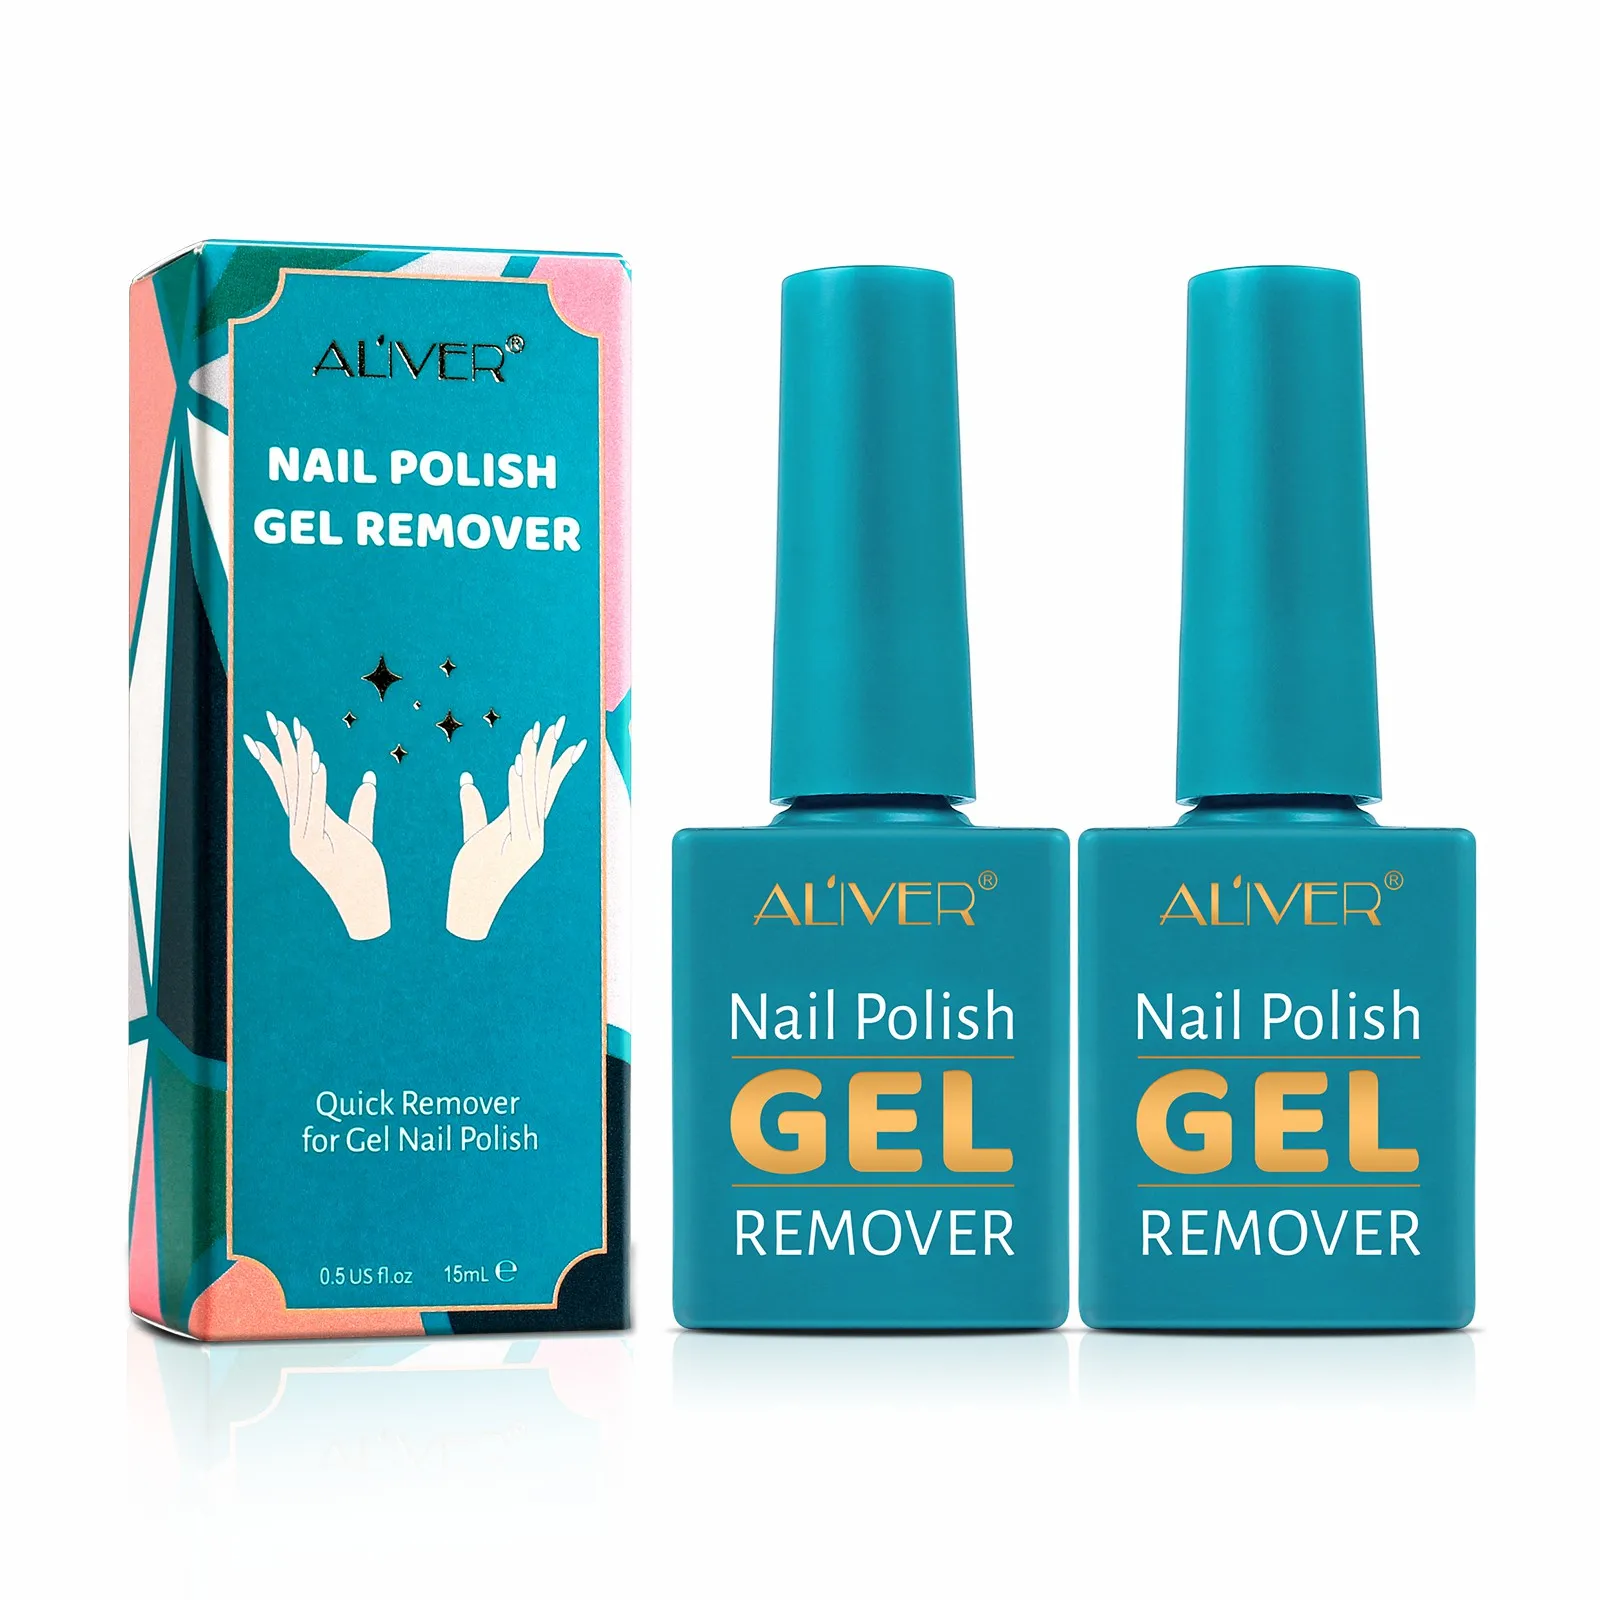 

ALIVER new nail cosmetics high quality magic remover quickly remove nail gel customized uv gel nail polish remover